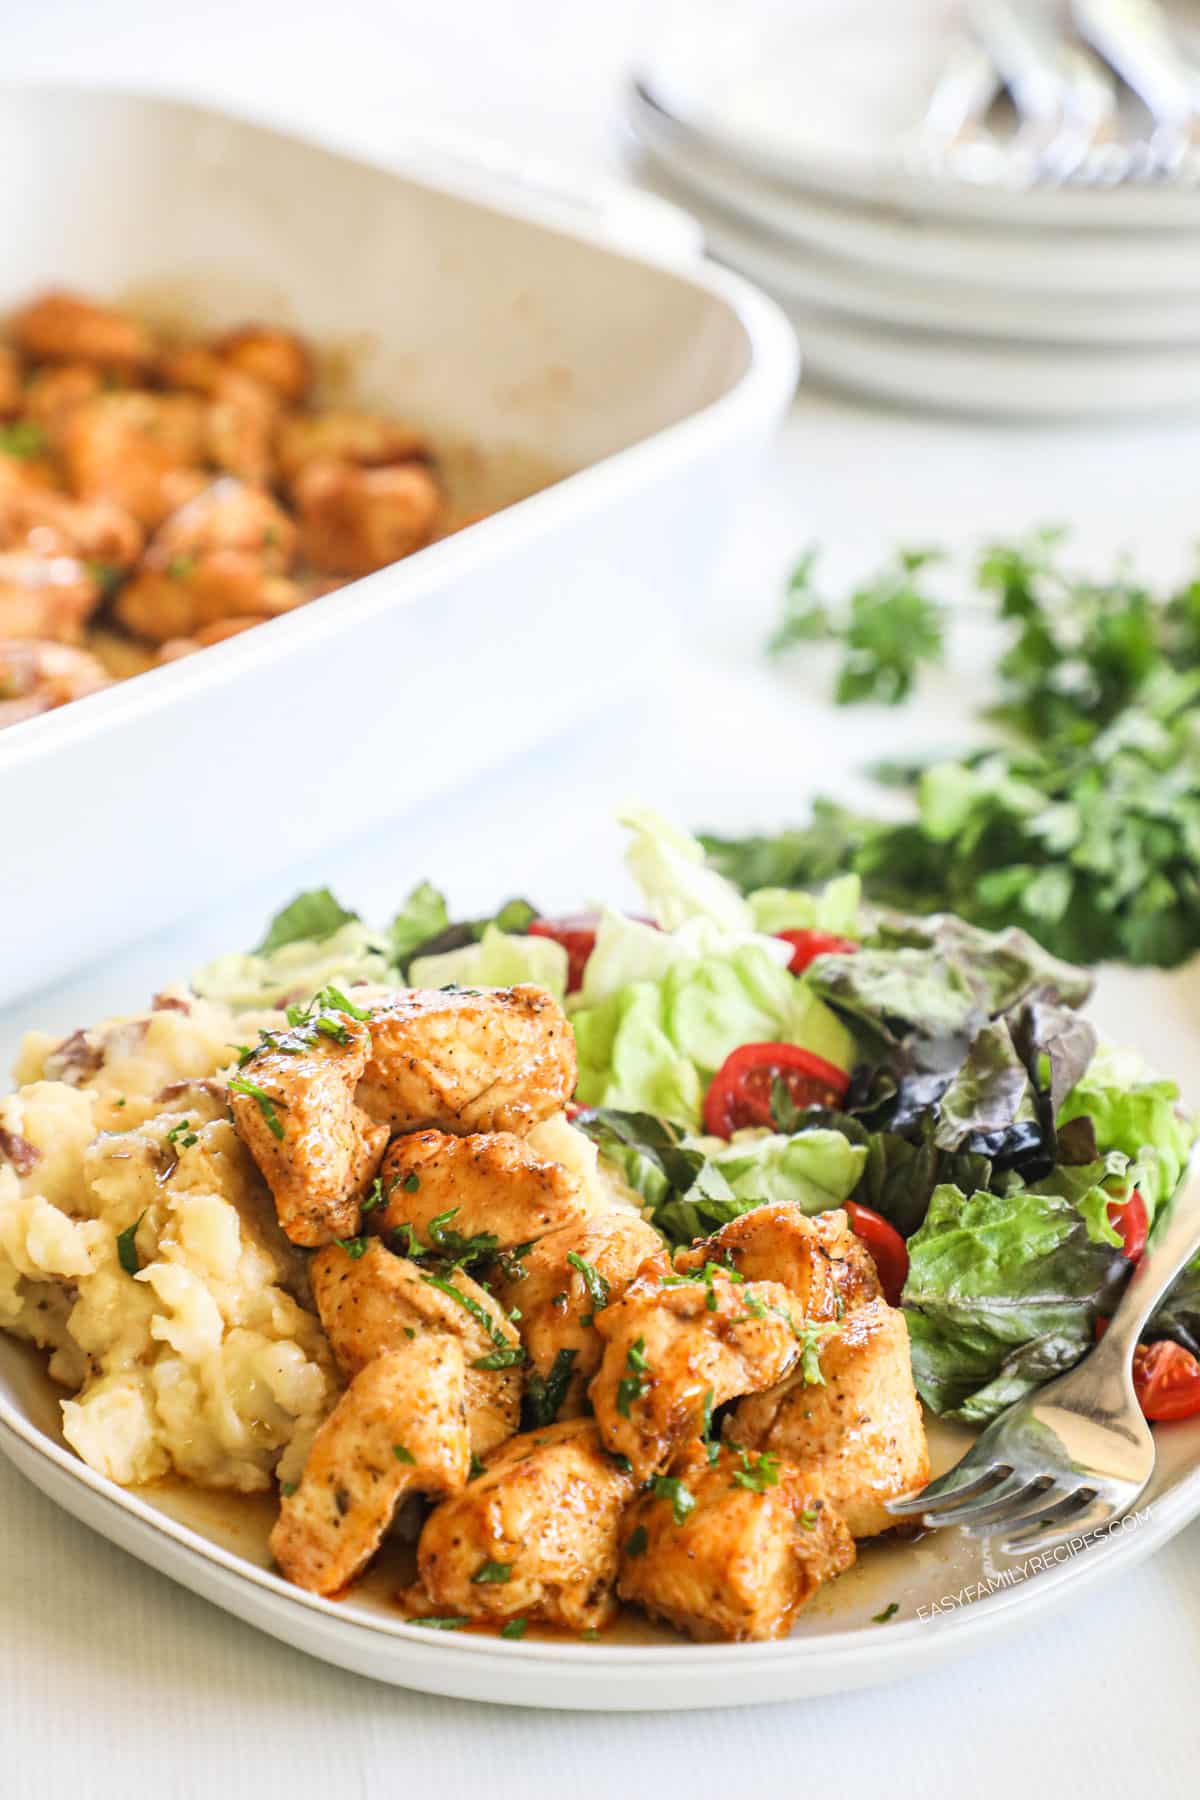 Chicken bites on plate with salad and fork